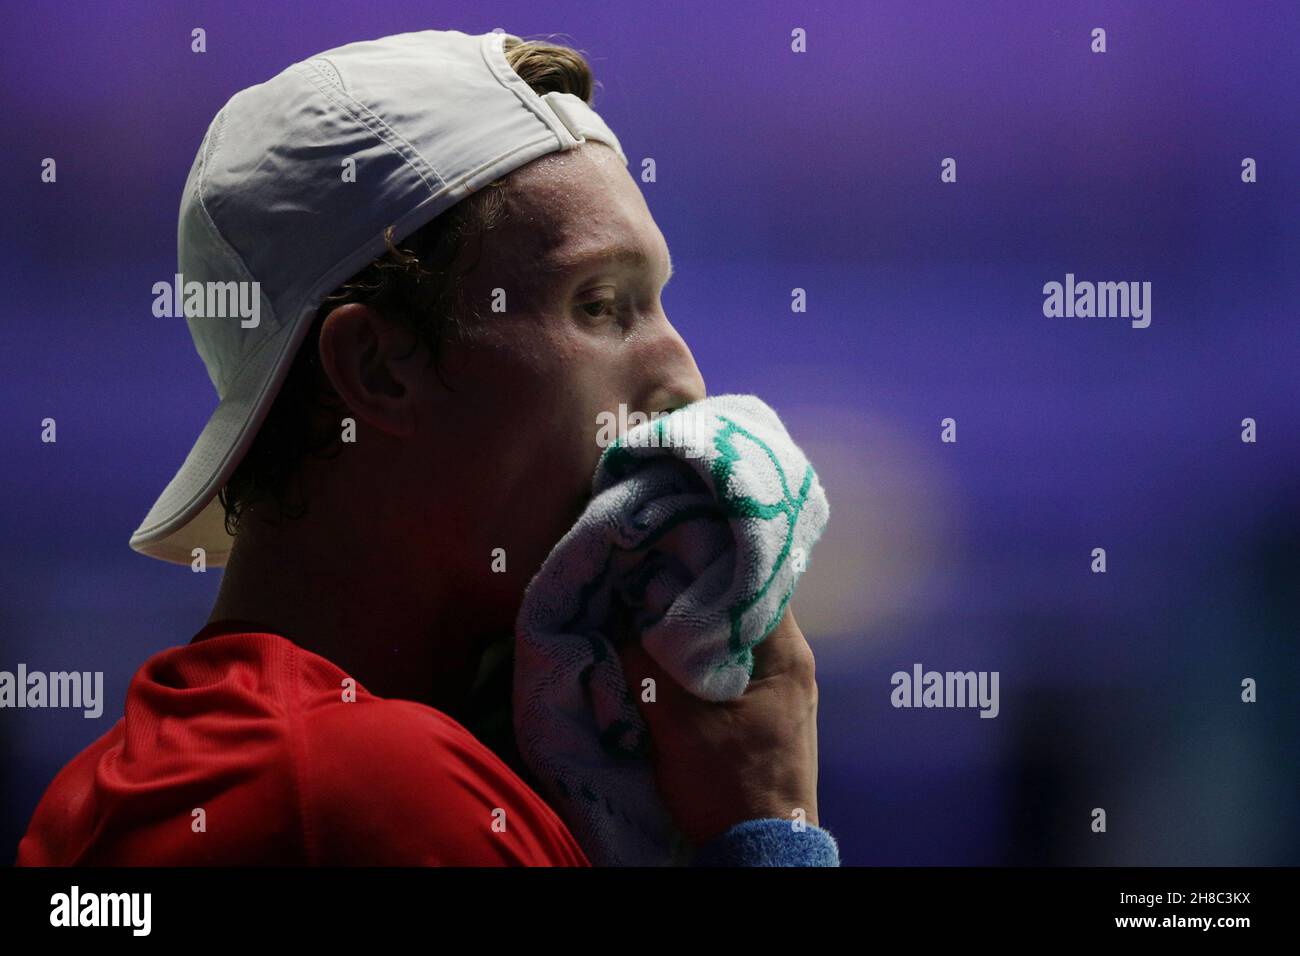 Czech Jiri Lehecka in action during the  Davis Cup group C match against Great Britain's Cameron Norrie between Great Britain and Czech Republic in In Stock Photo